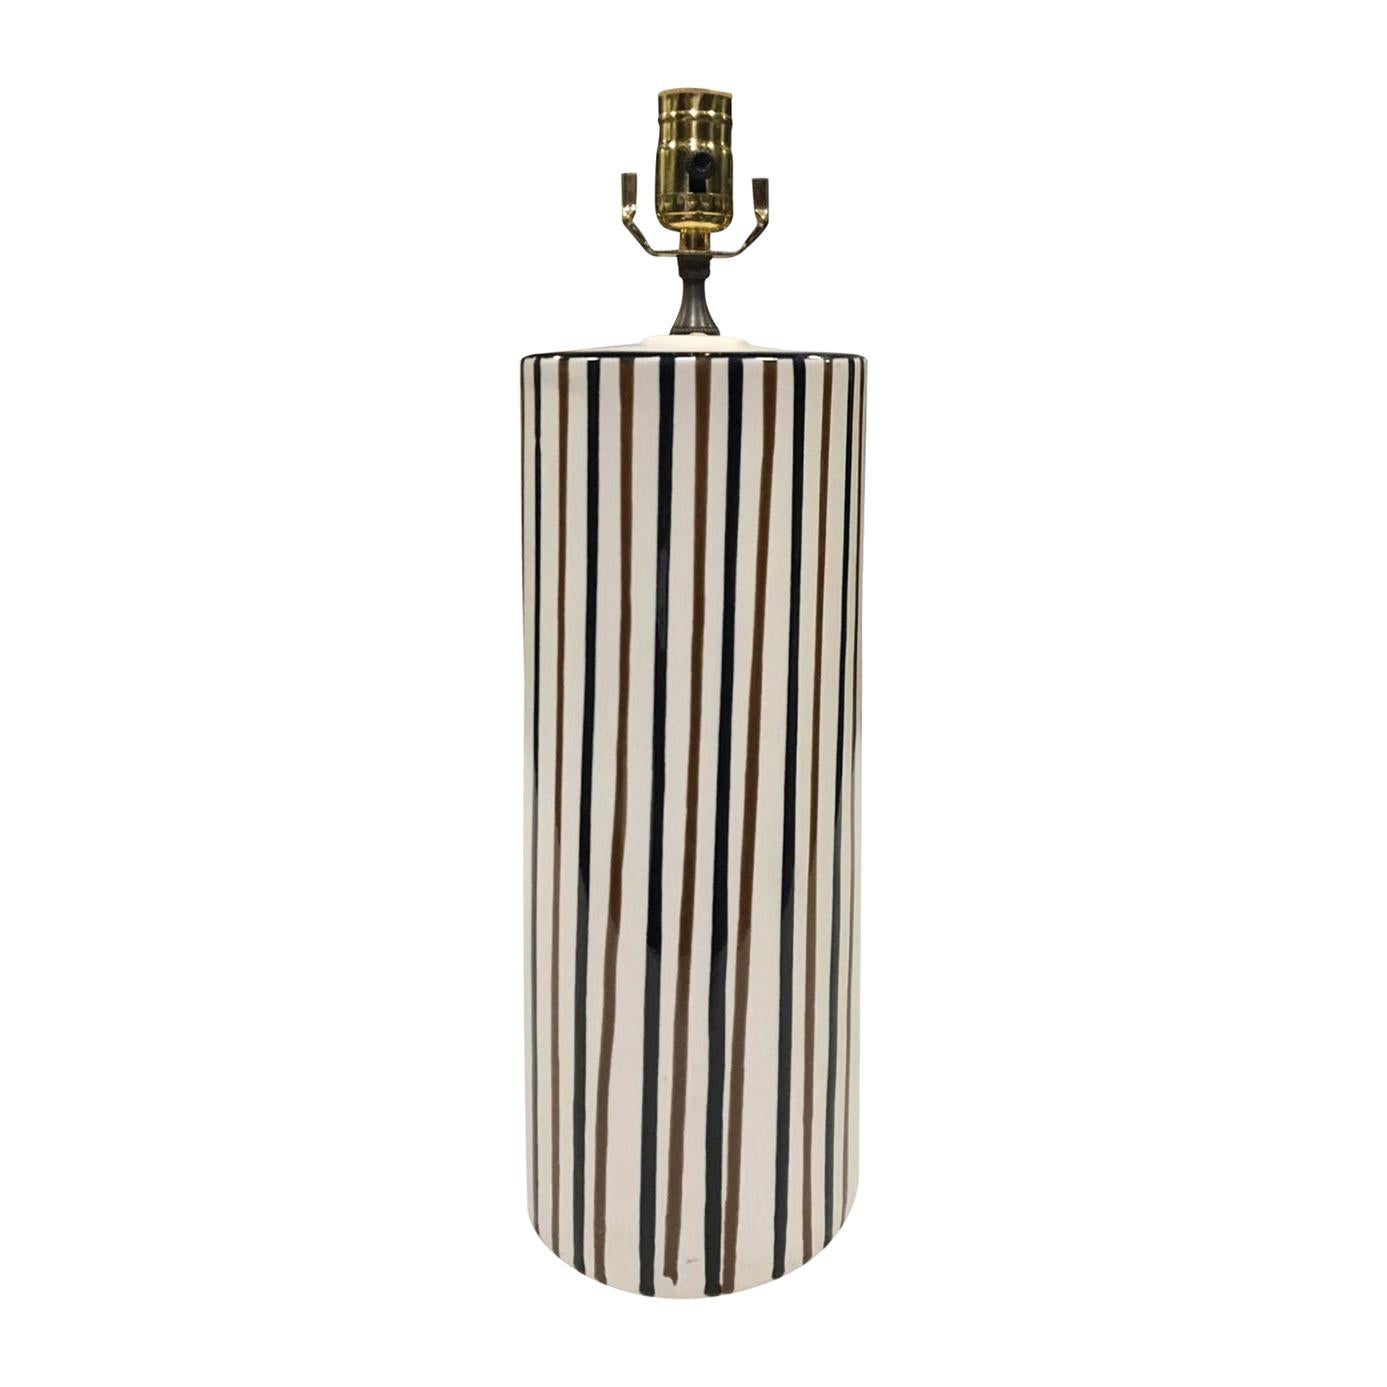 Mid-20th Century Striped Pottery Cylinder Lamp For Sale